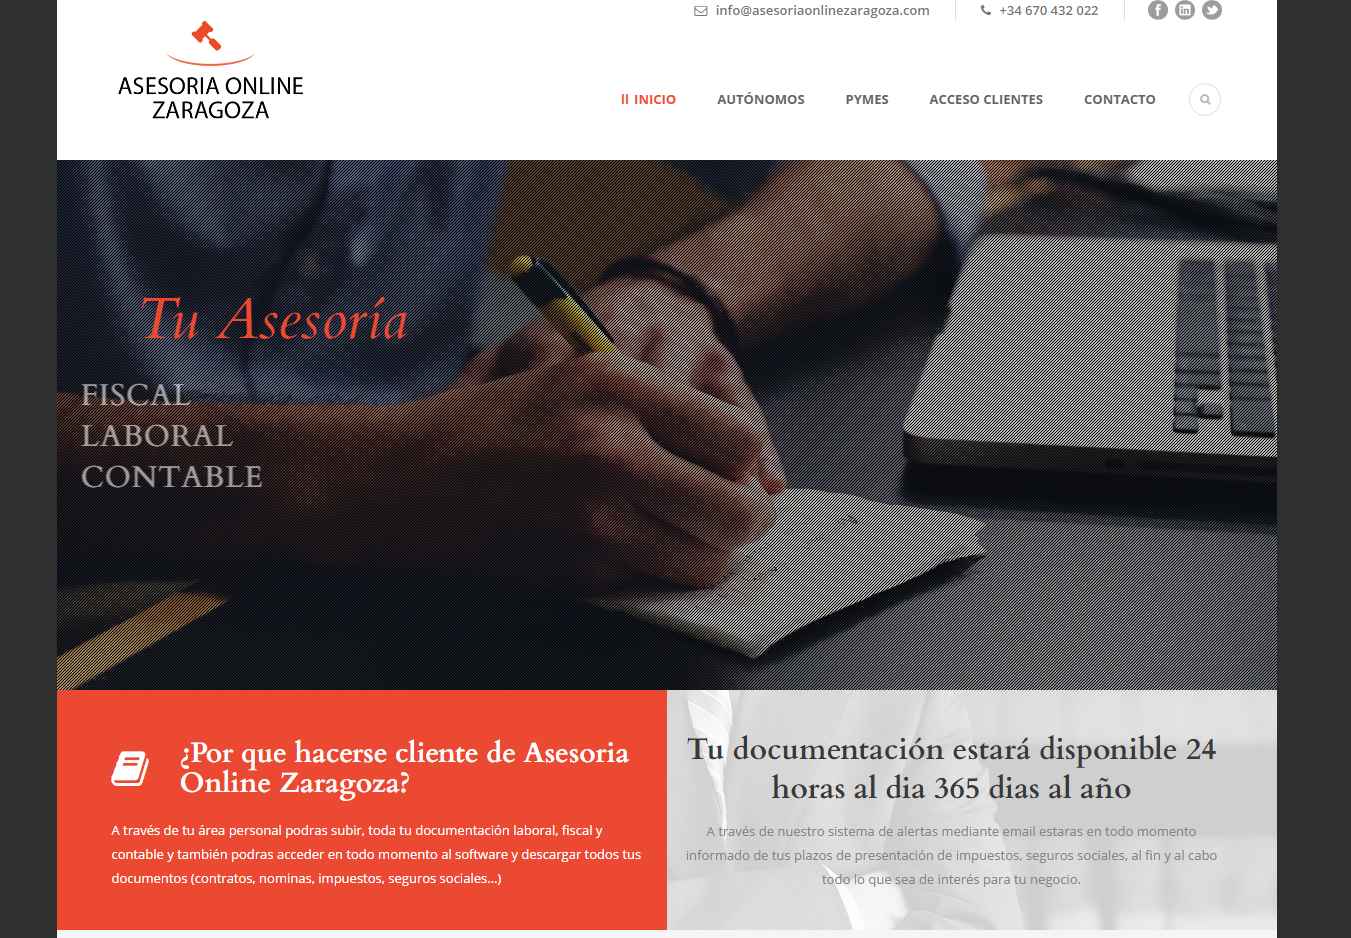 Web design for online consulting and management